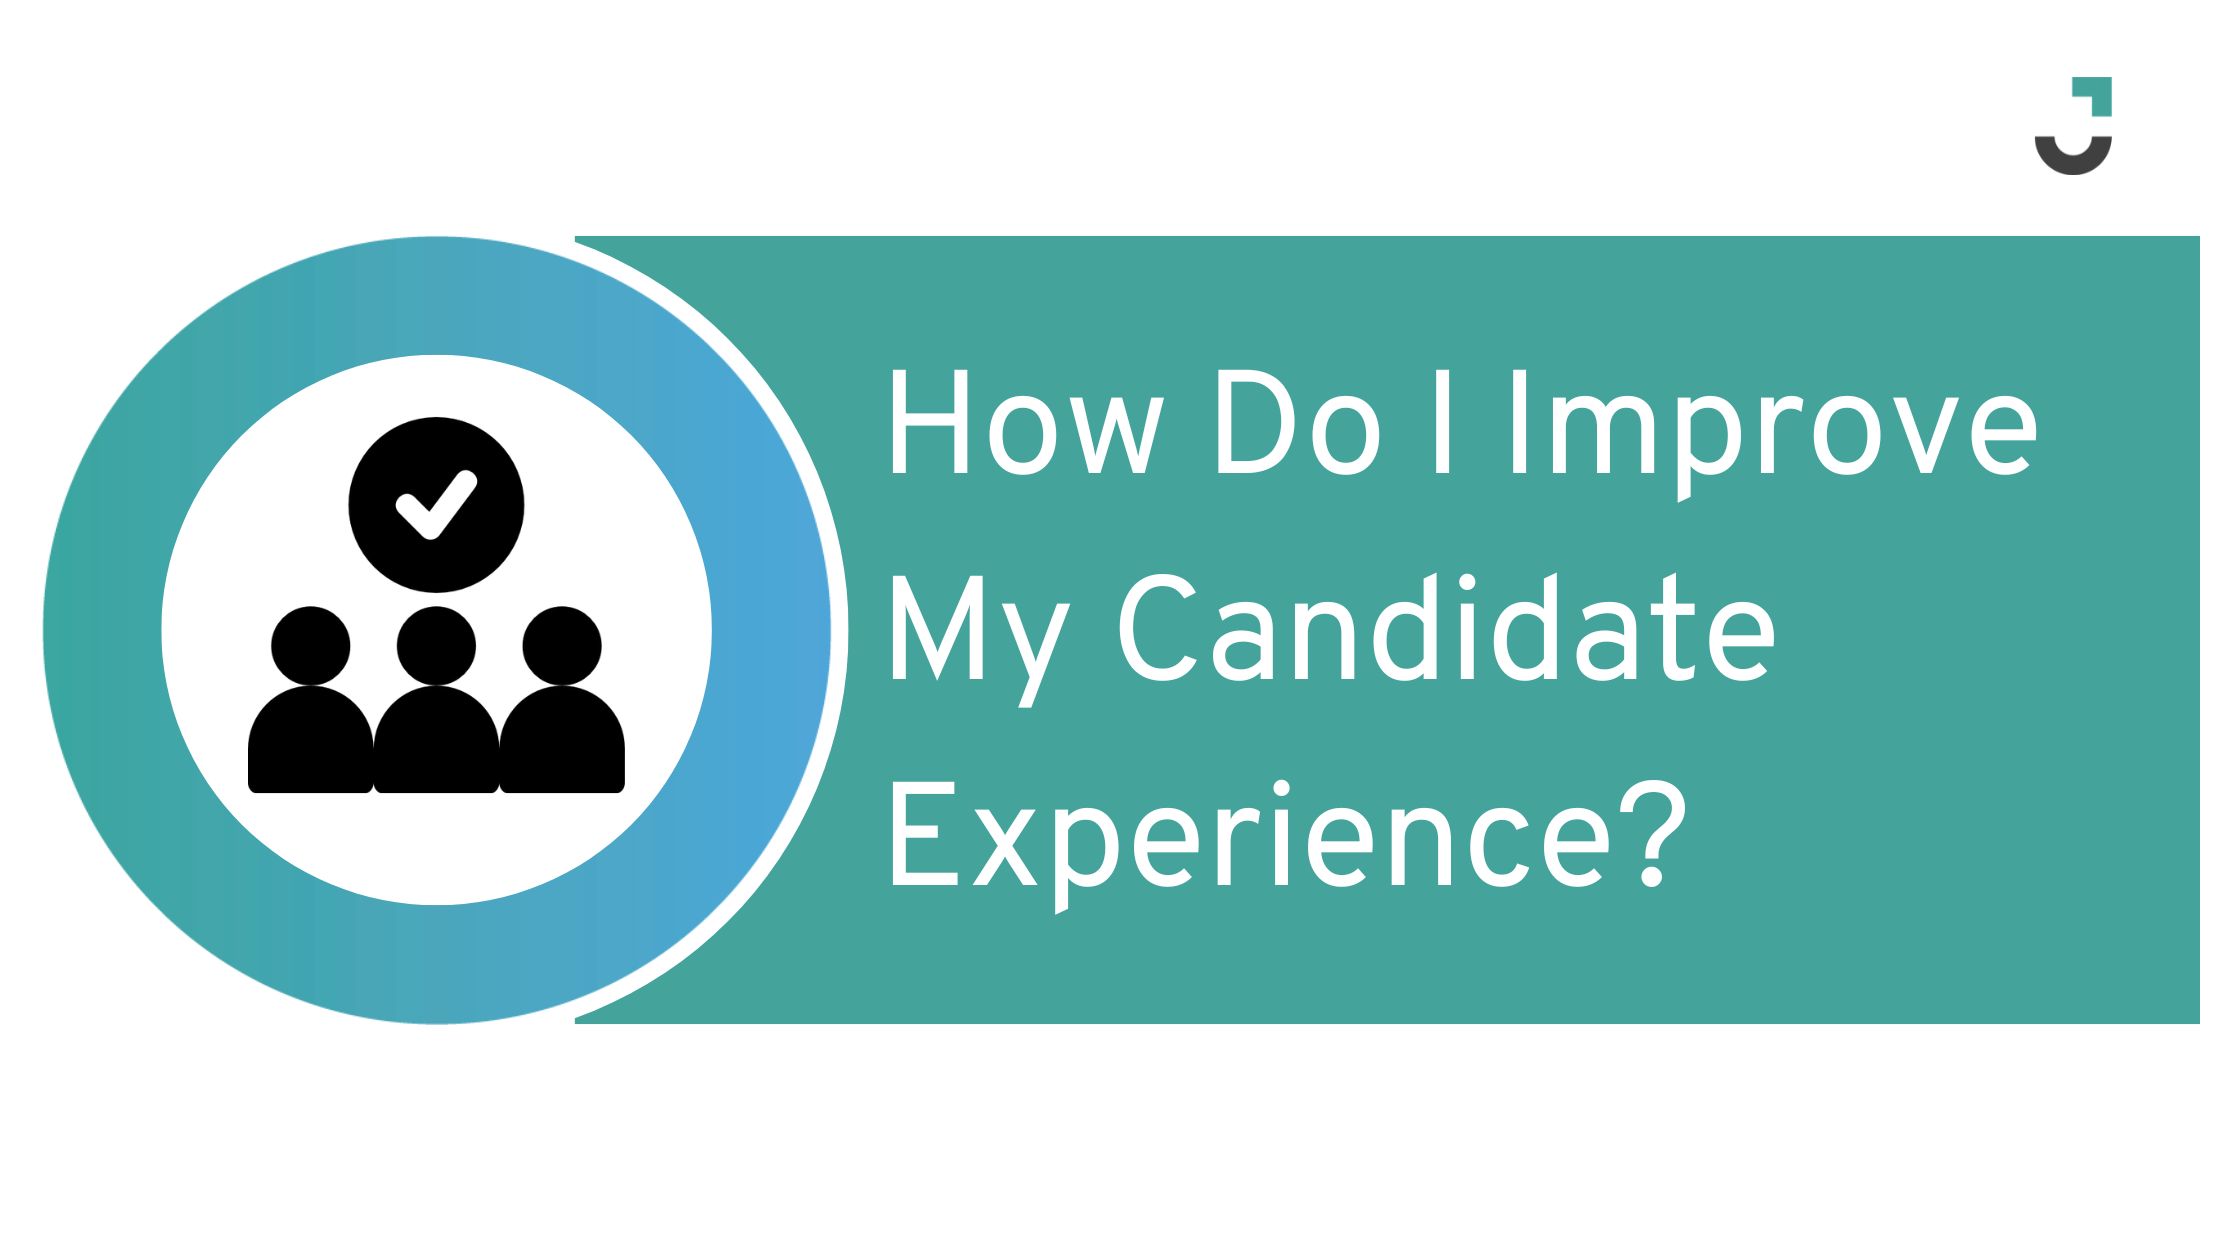 How Do I Improve My Candidate Experience?